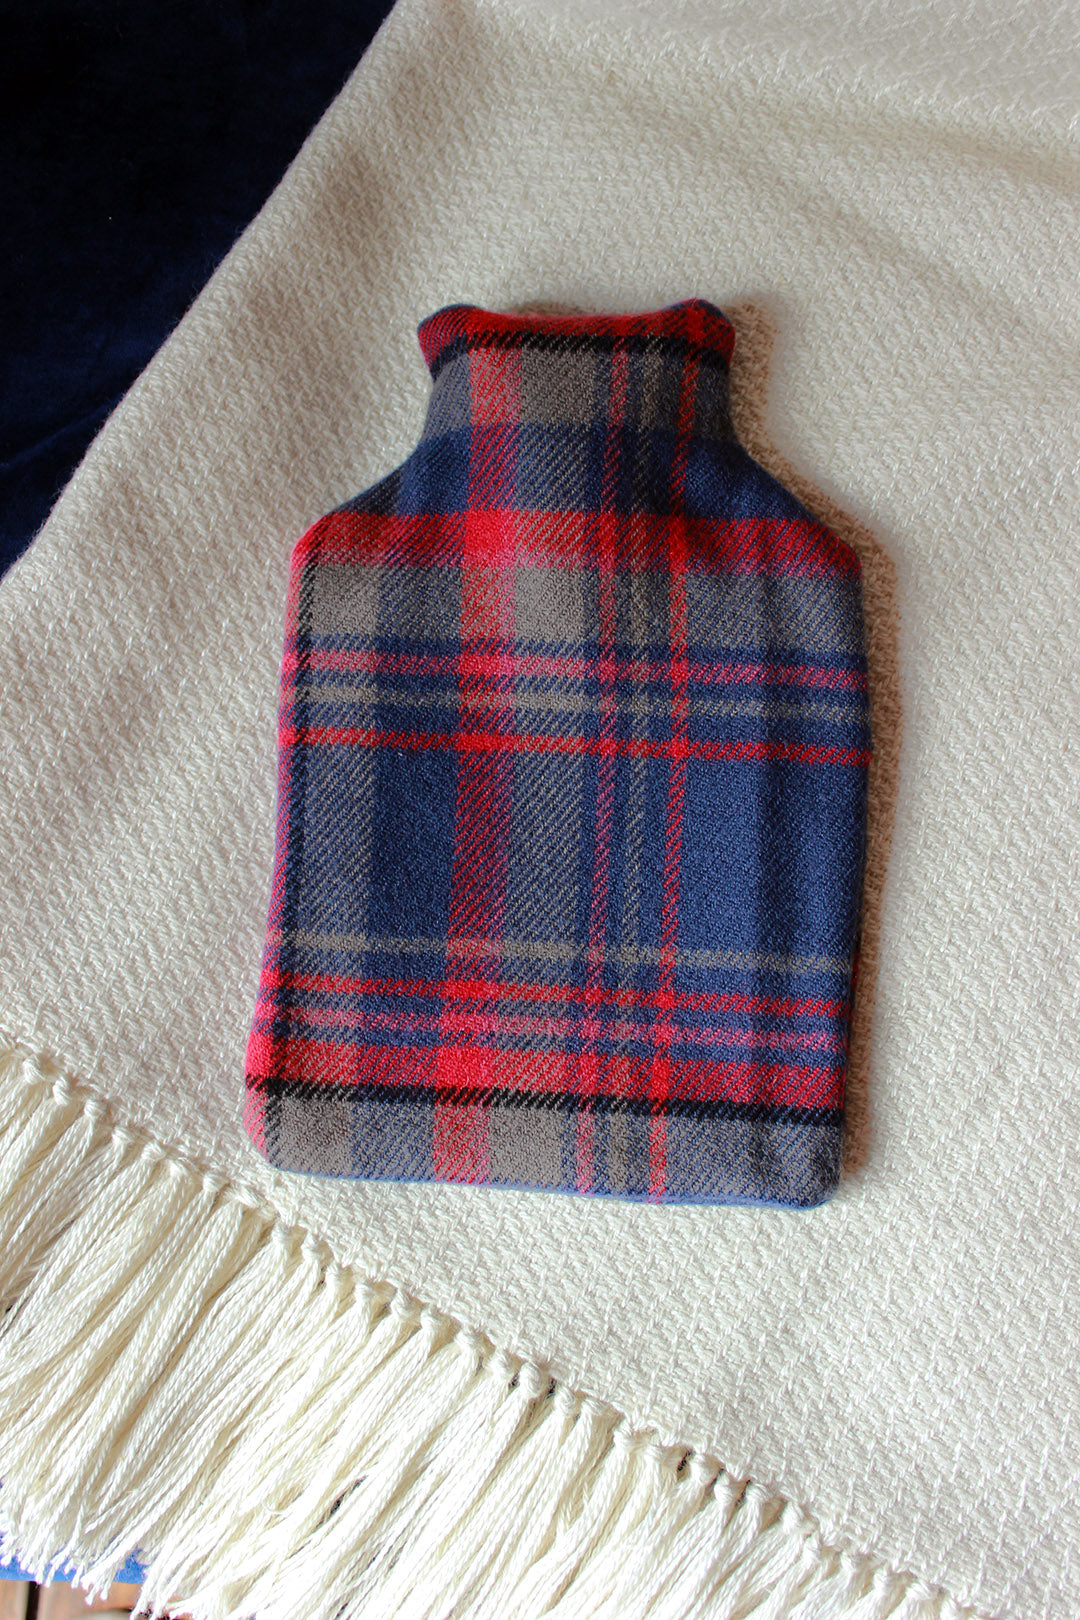 Snuggle up with our limited edition Araminta Campbell Highlands at Dusk tartan hot water bottle